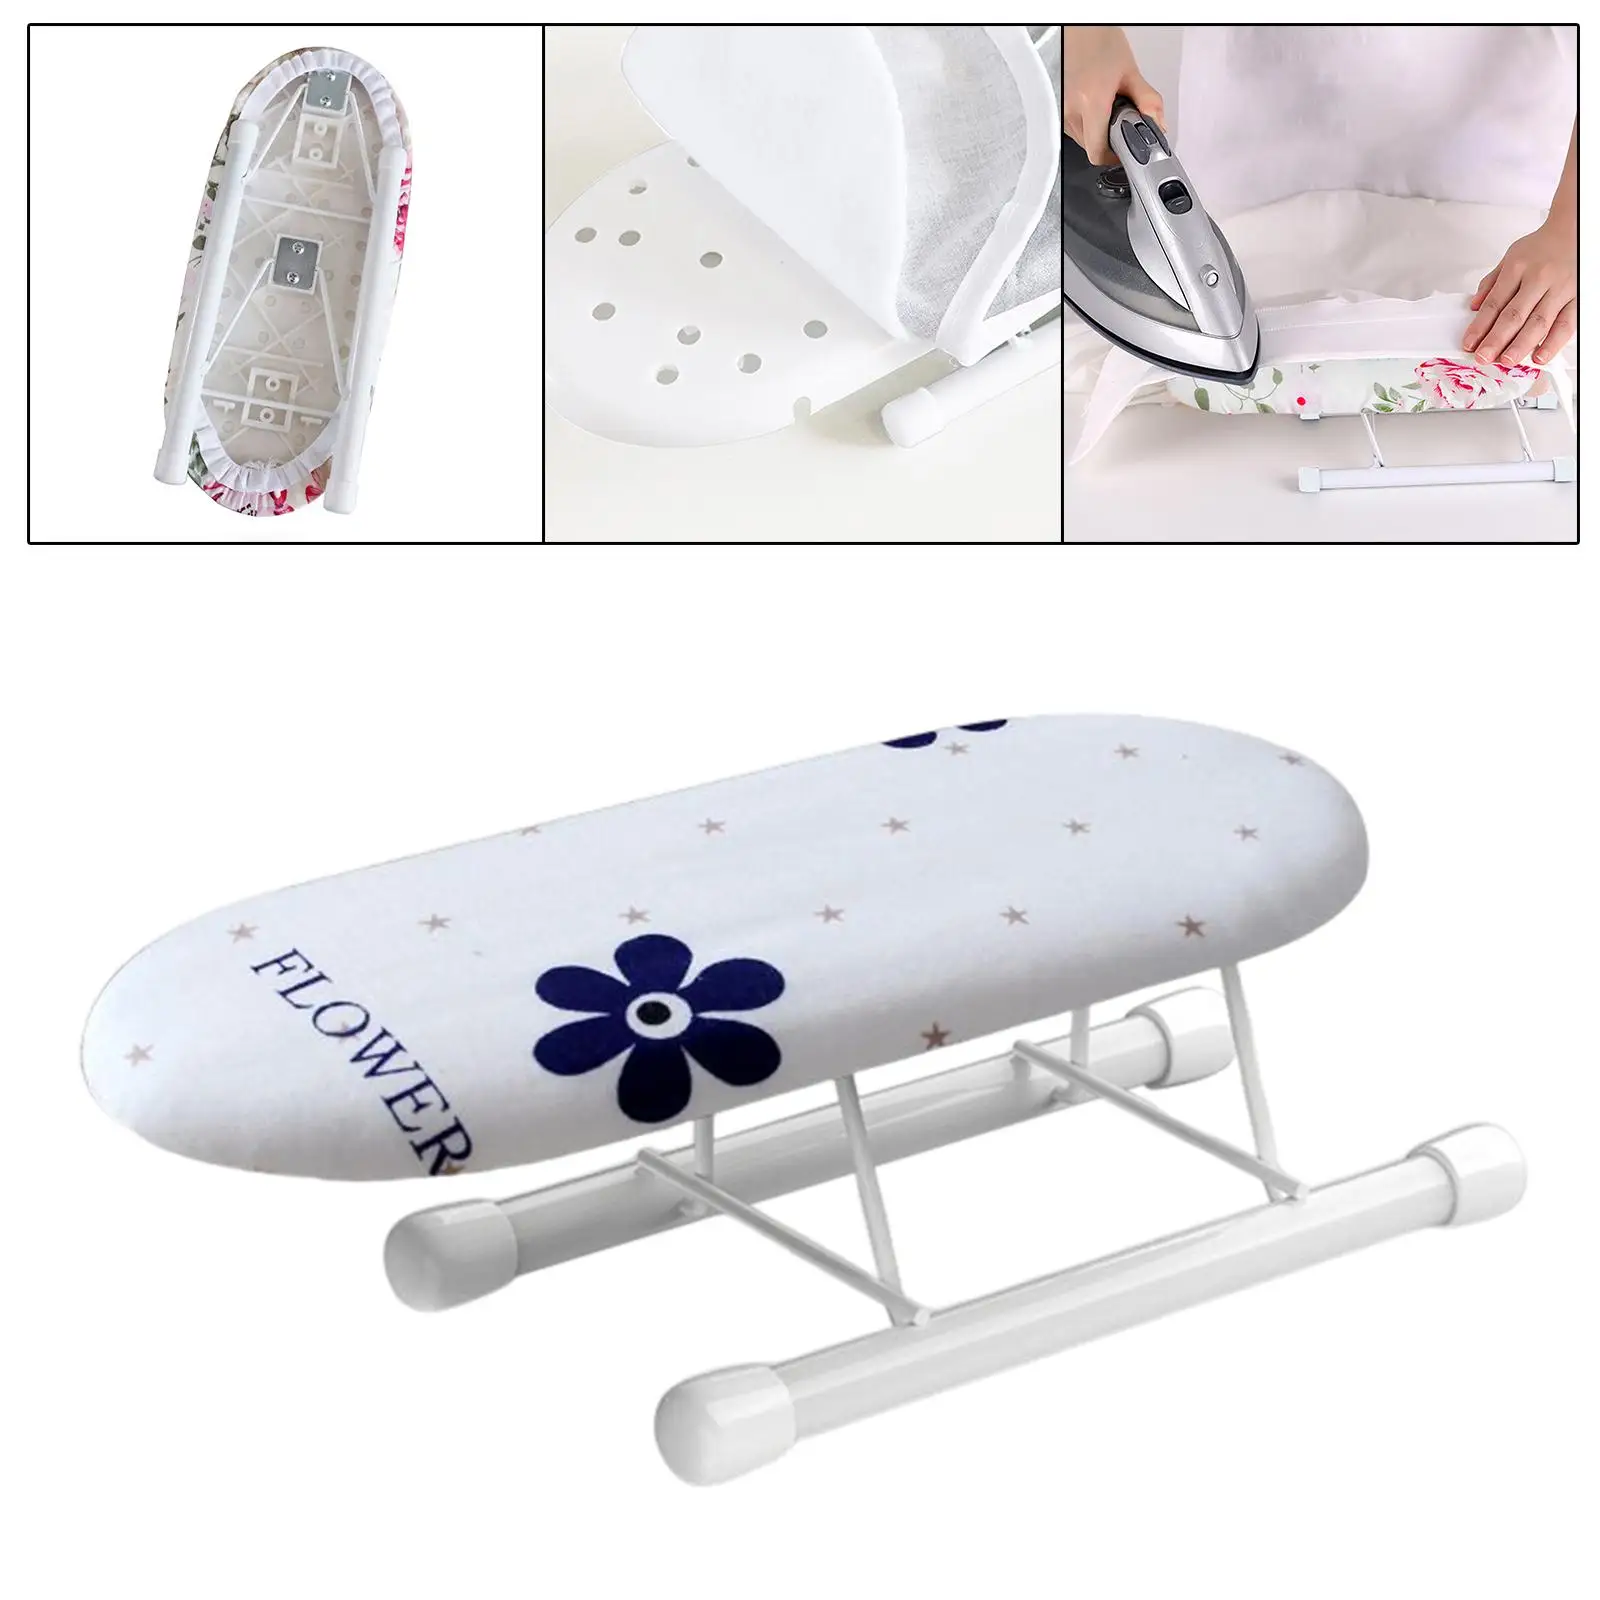 Portable Ironing Board Removable Sleeve Ironing Accessories for Countertop Room Dorms